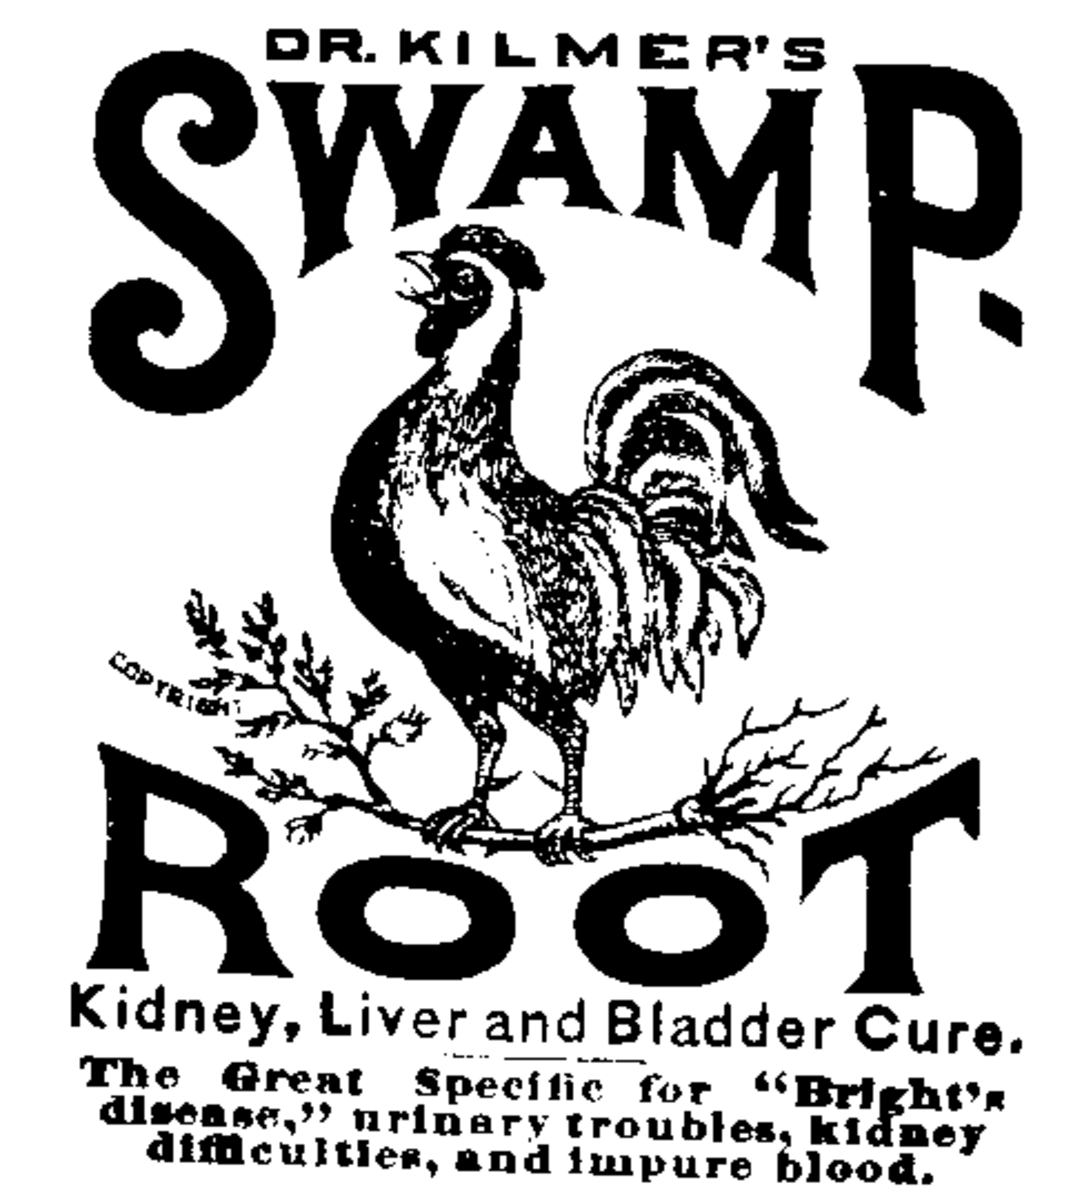 Gold Rush Medicine:  Swamp Root, Snake Oil and Other Questionable Potions, Pills and Powders